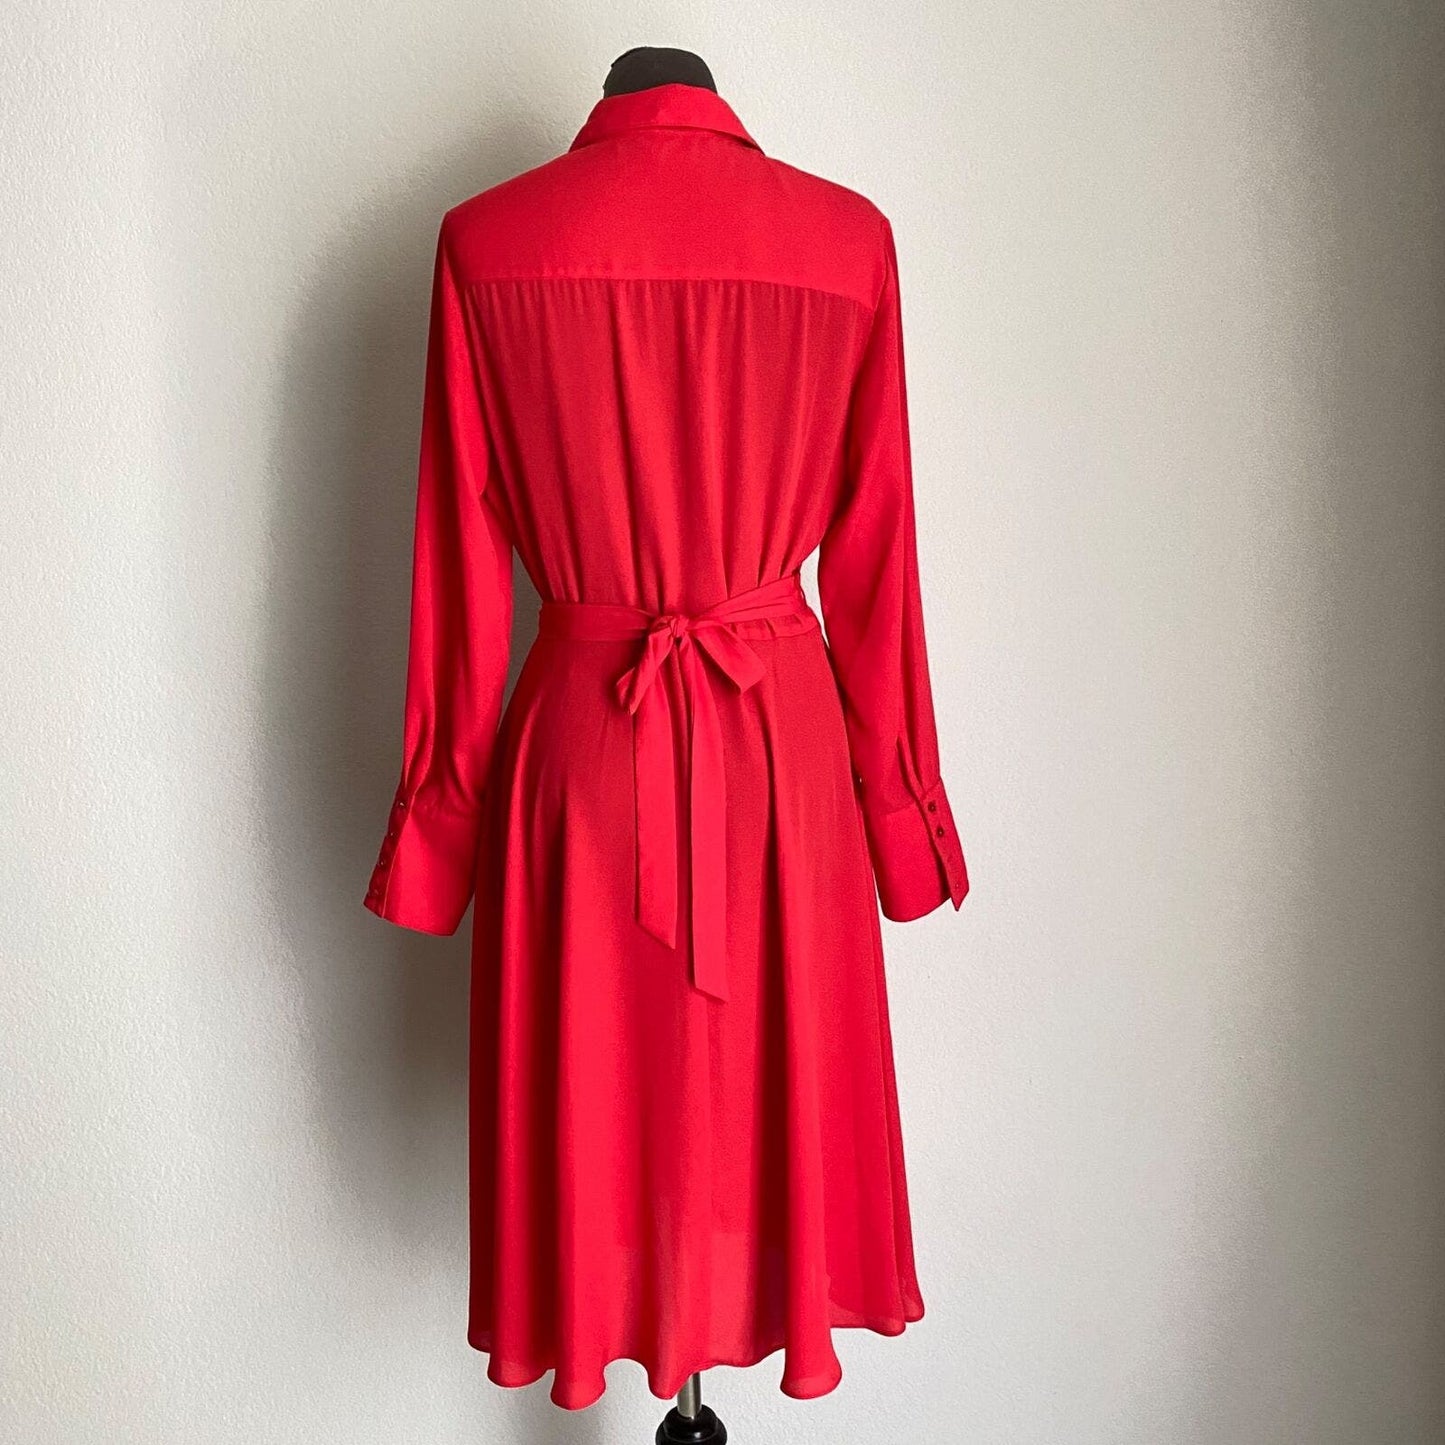 Nanette Lepore sz 6 vintage inspired 60s 70s button pleated flare dress